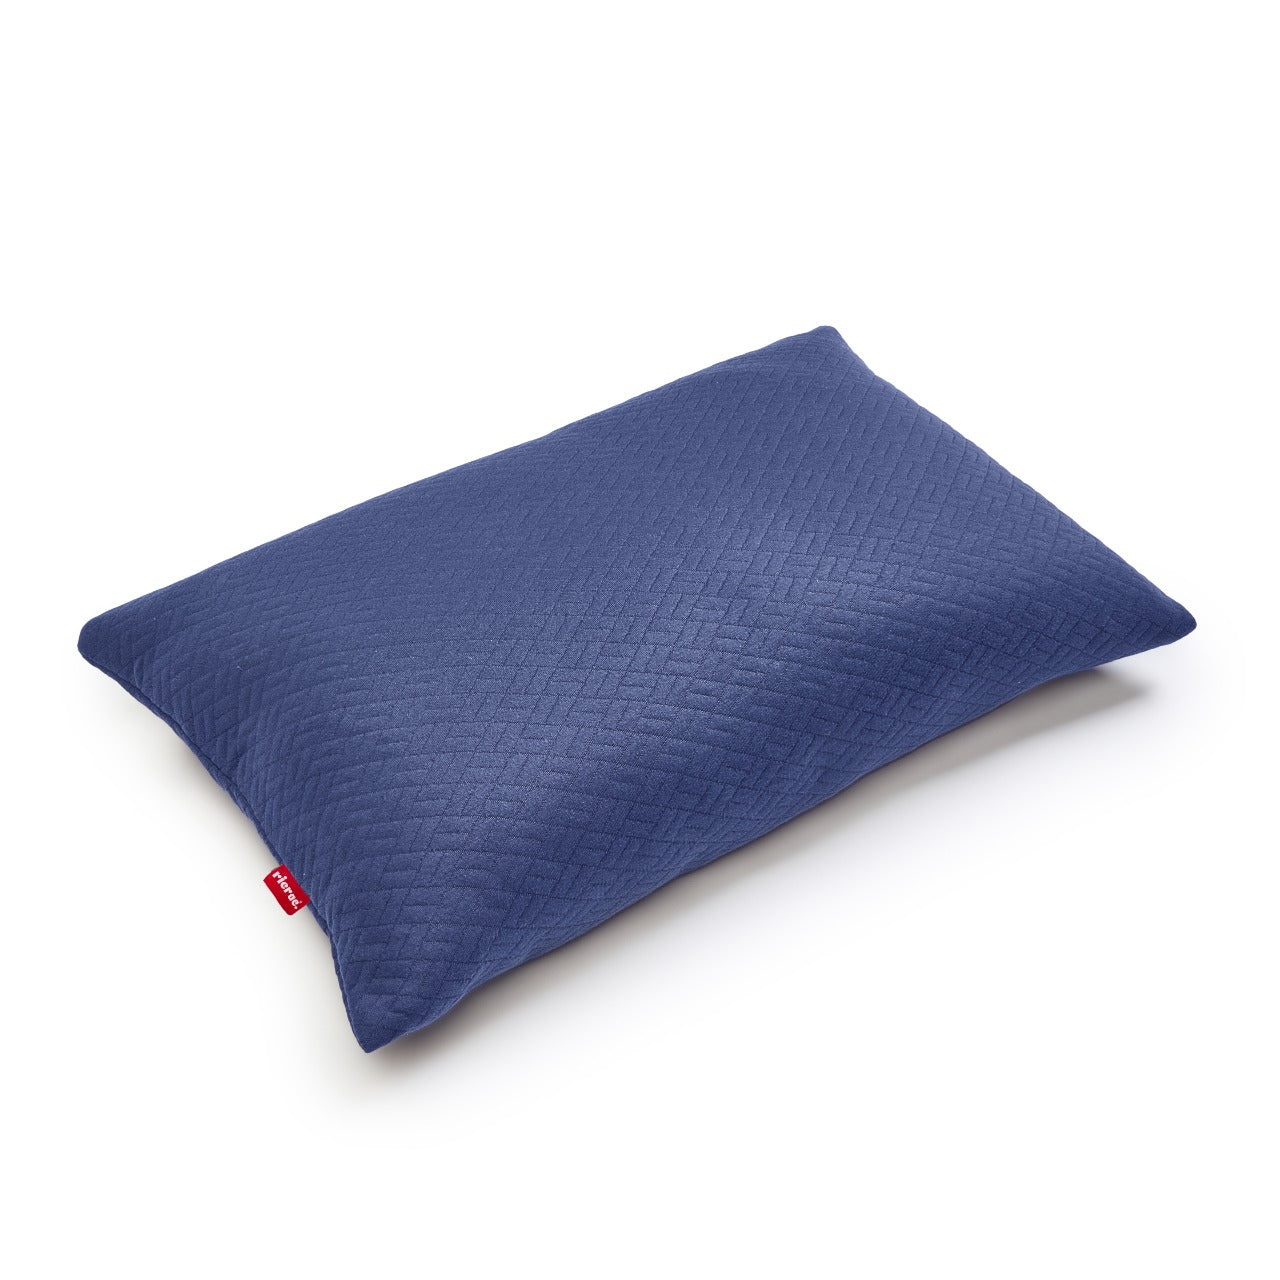 Soft Arched Latex Pillow